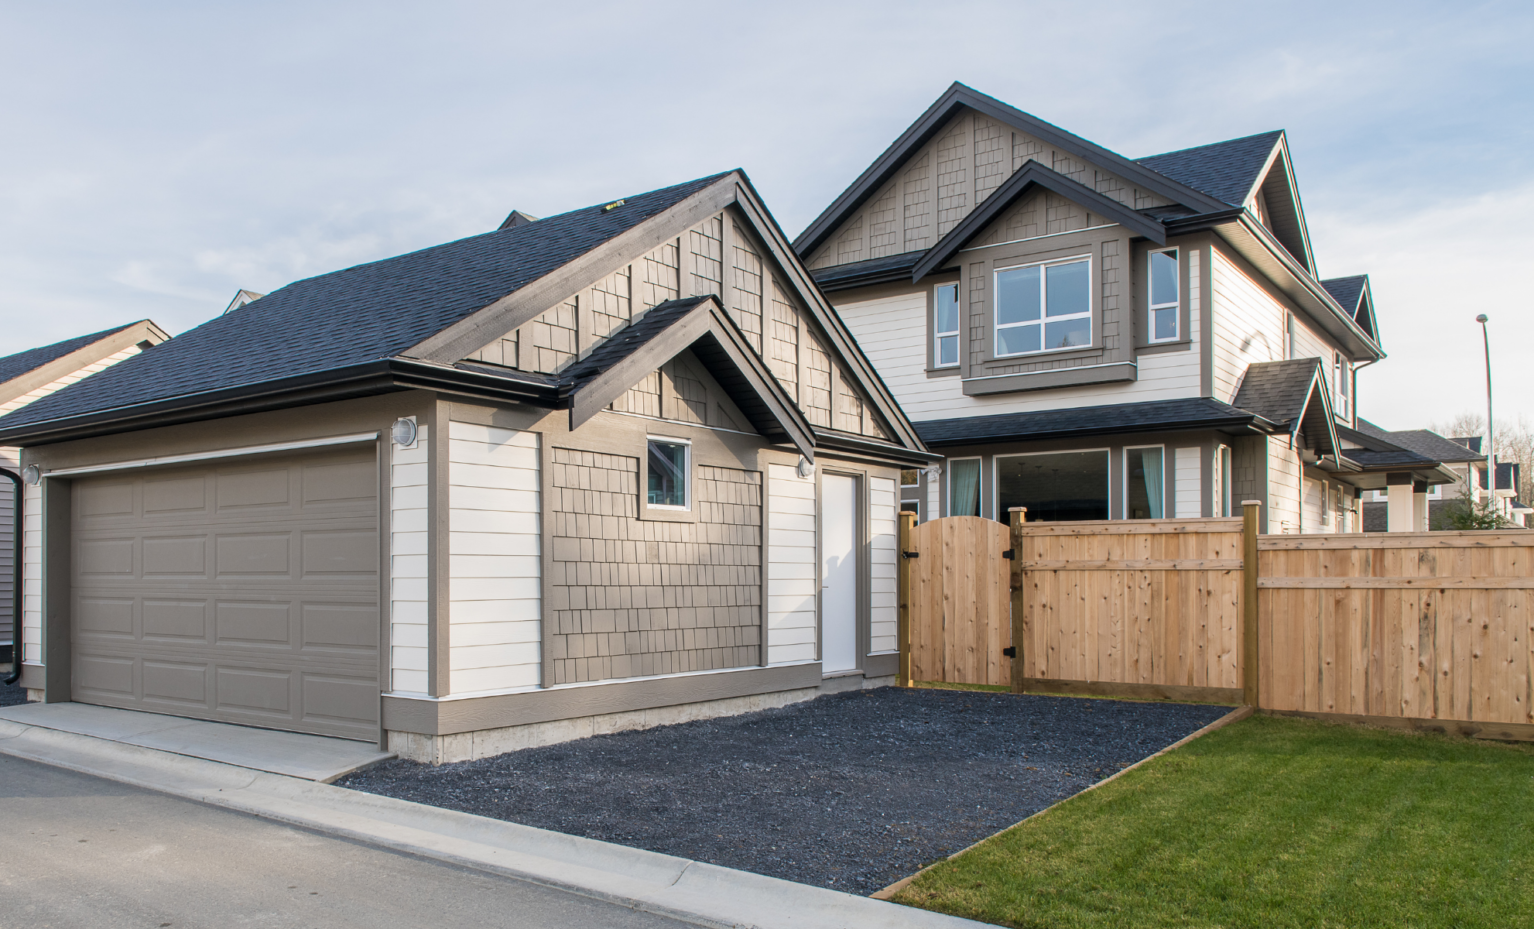 Westbrooke at Willoughby - Foxridge Homes